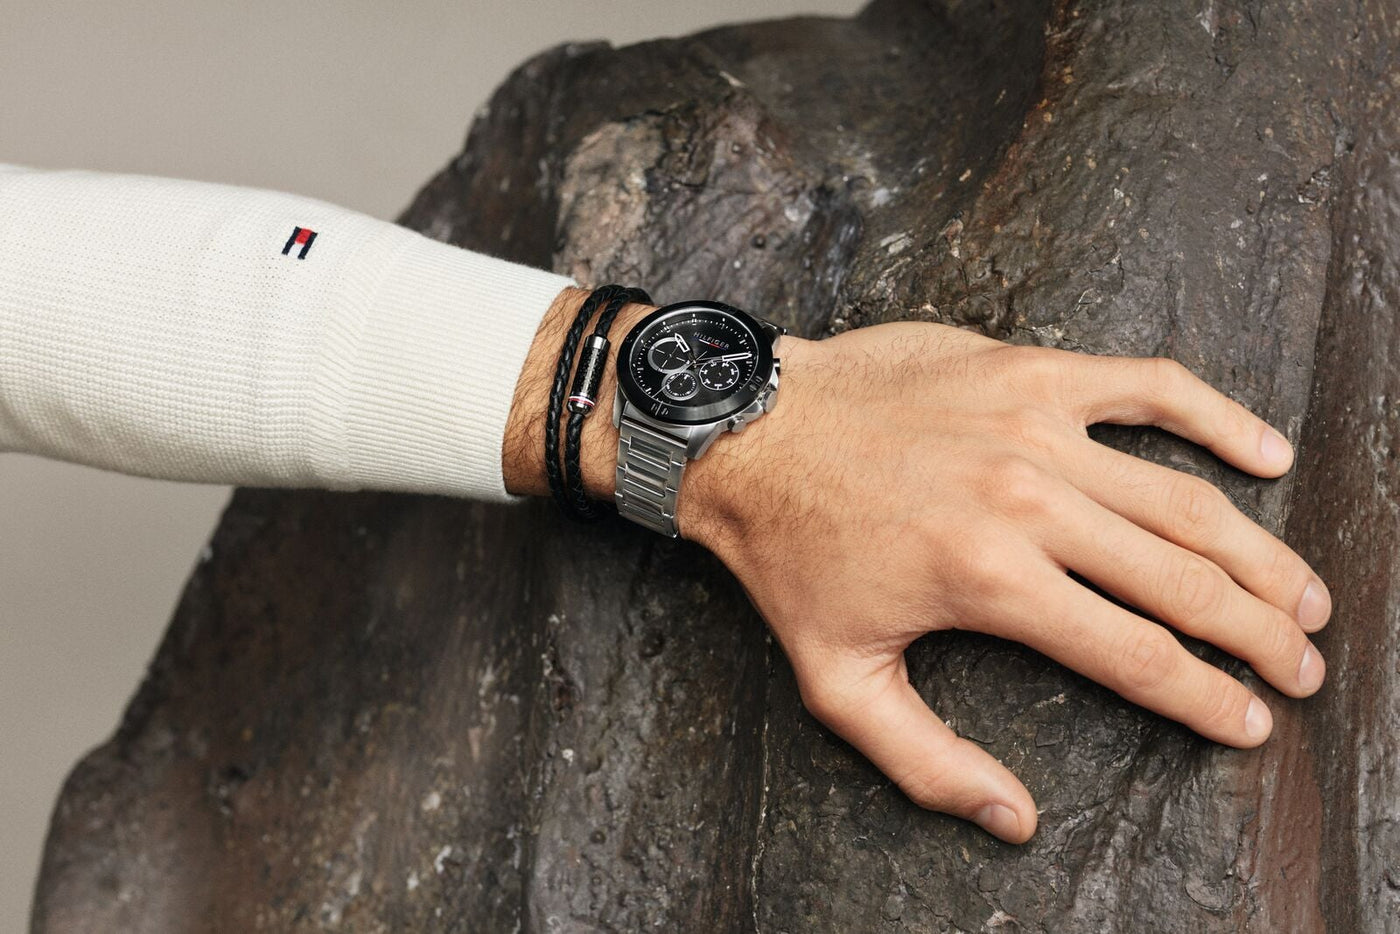 Tommy Hilfiger Men's Watch Dark Grey with Black Face on male models wrist placed on rock.